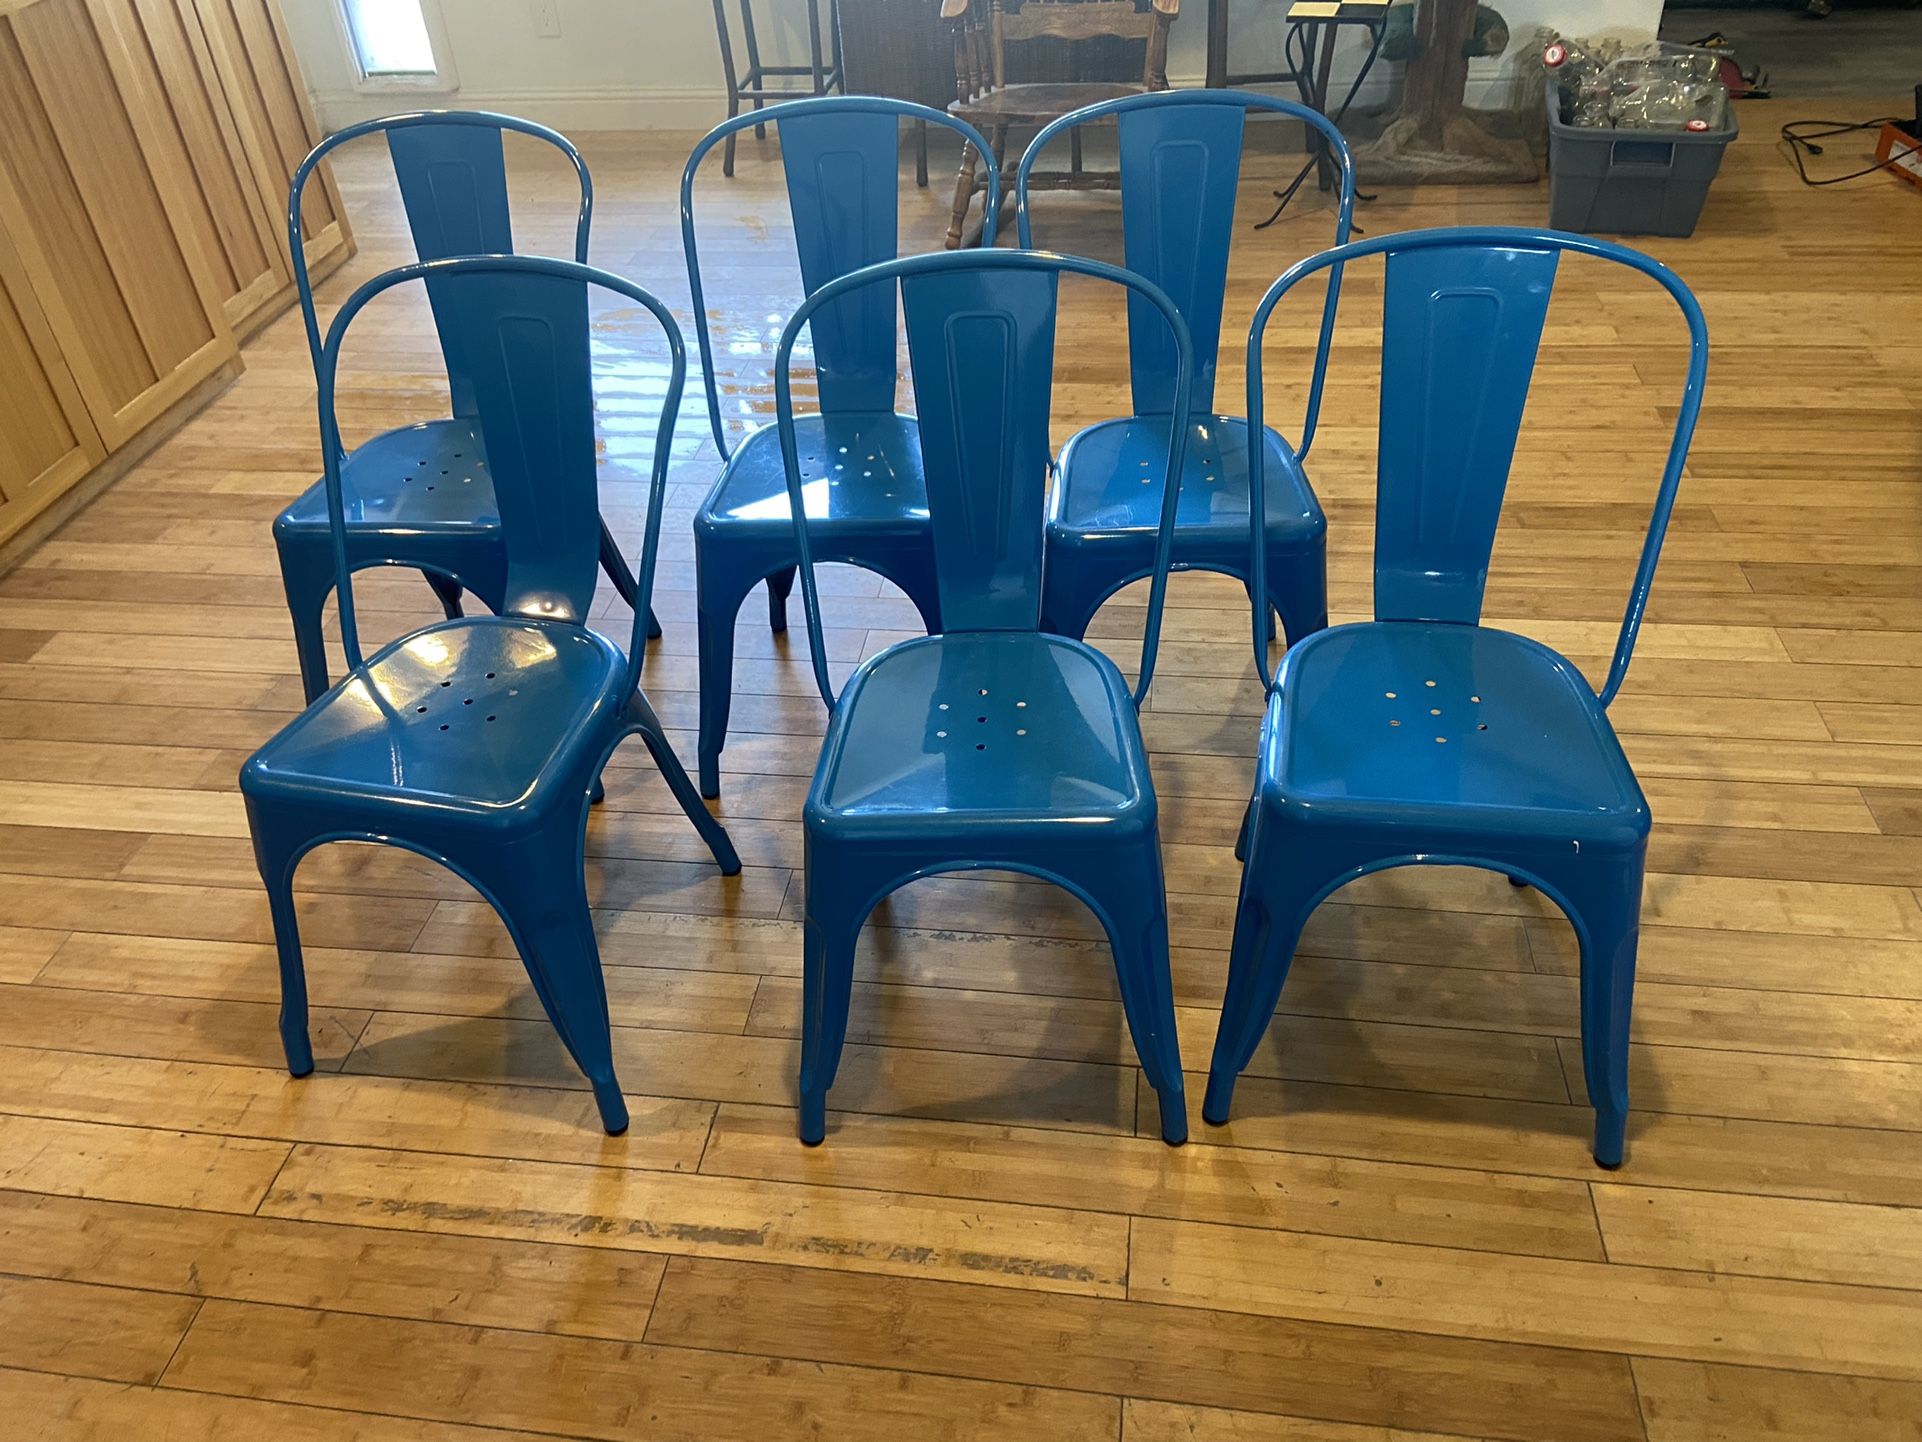 Metal chairs